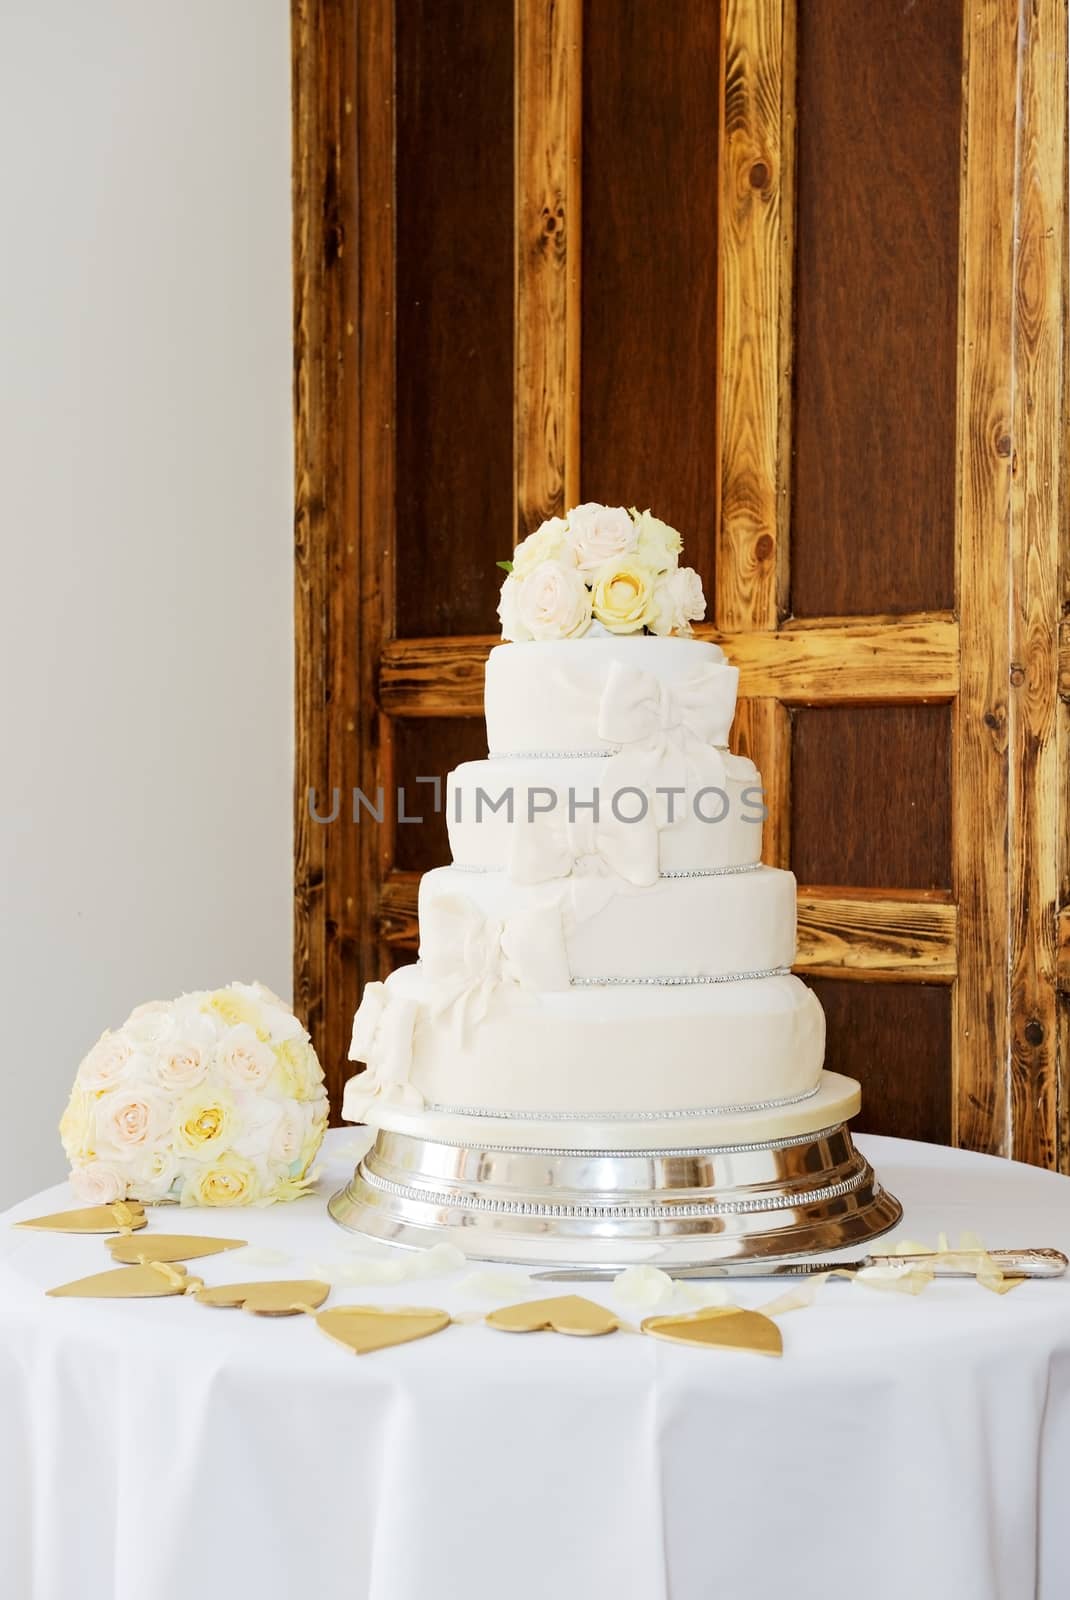 Wedding cake and brides bouquet of flowers at reception